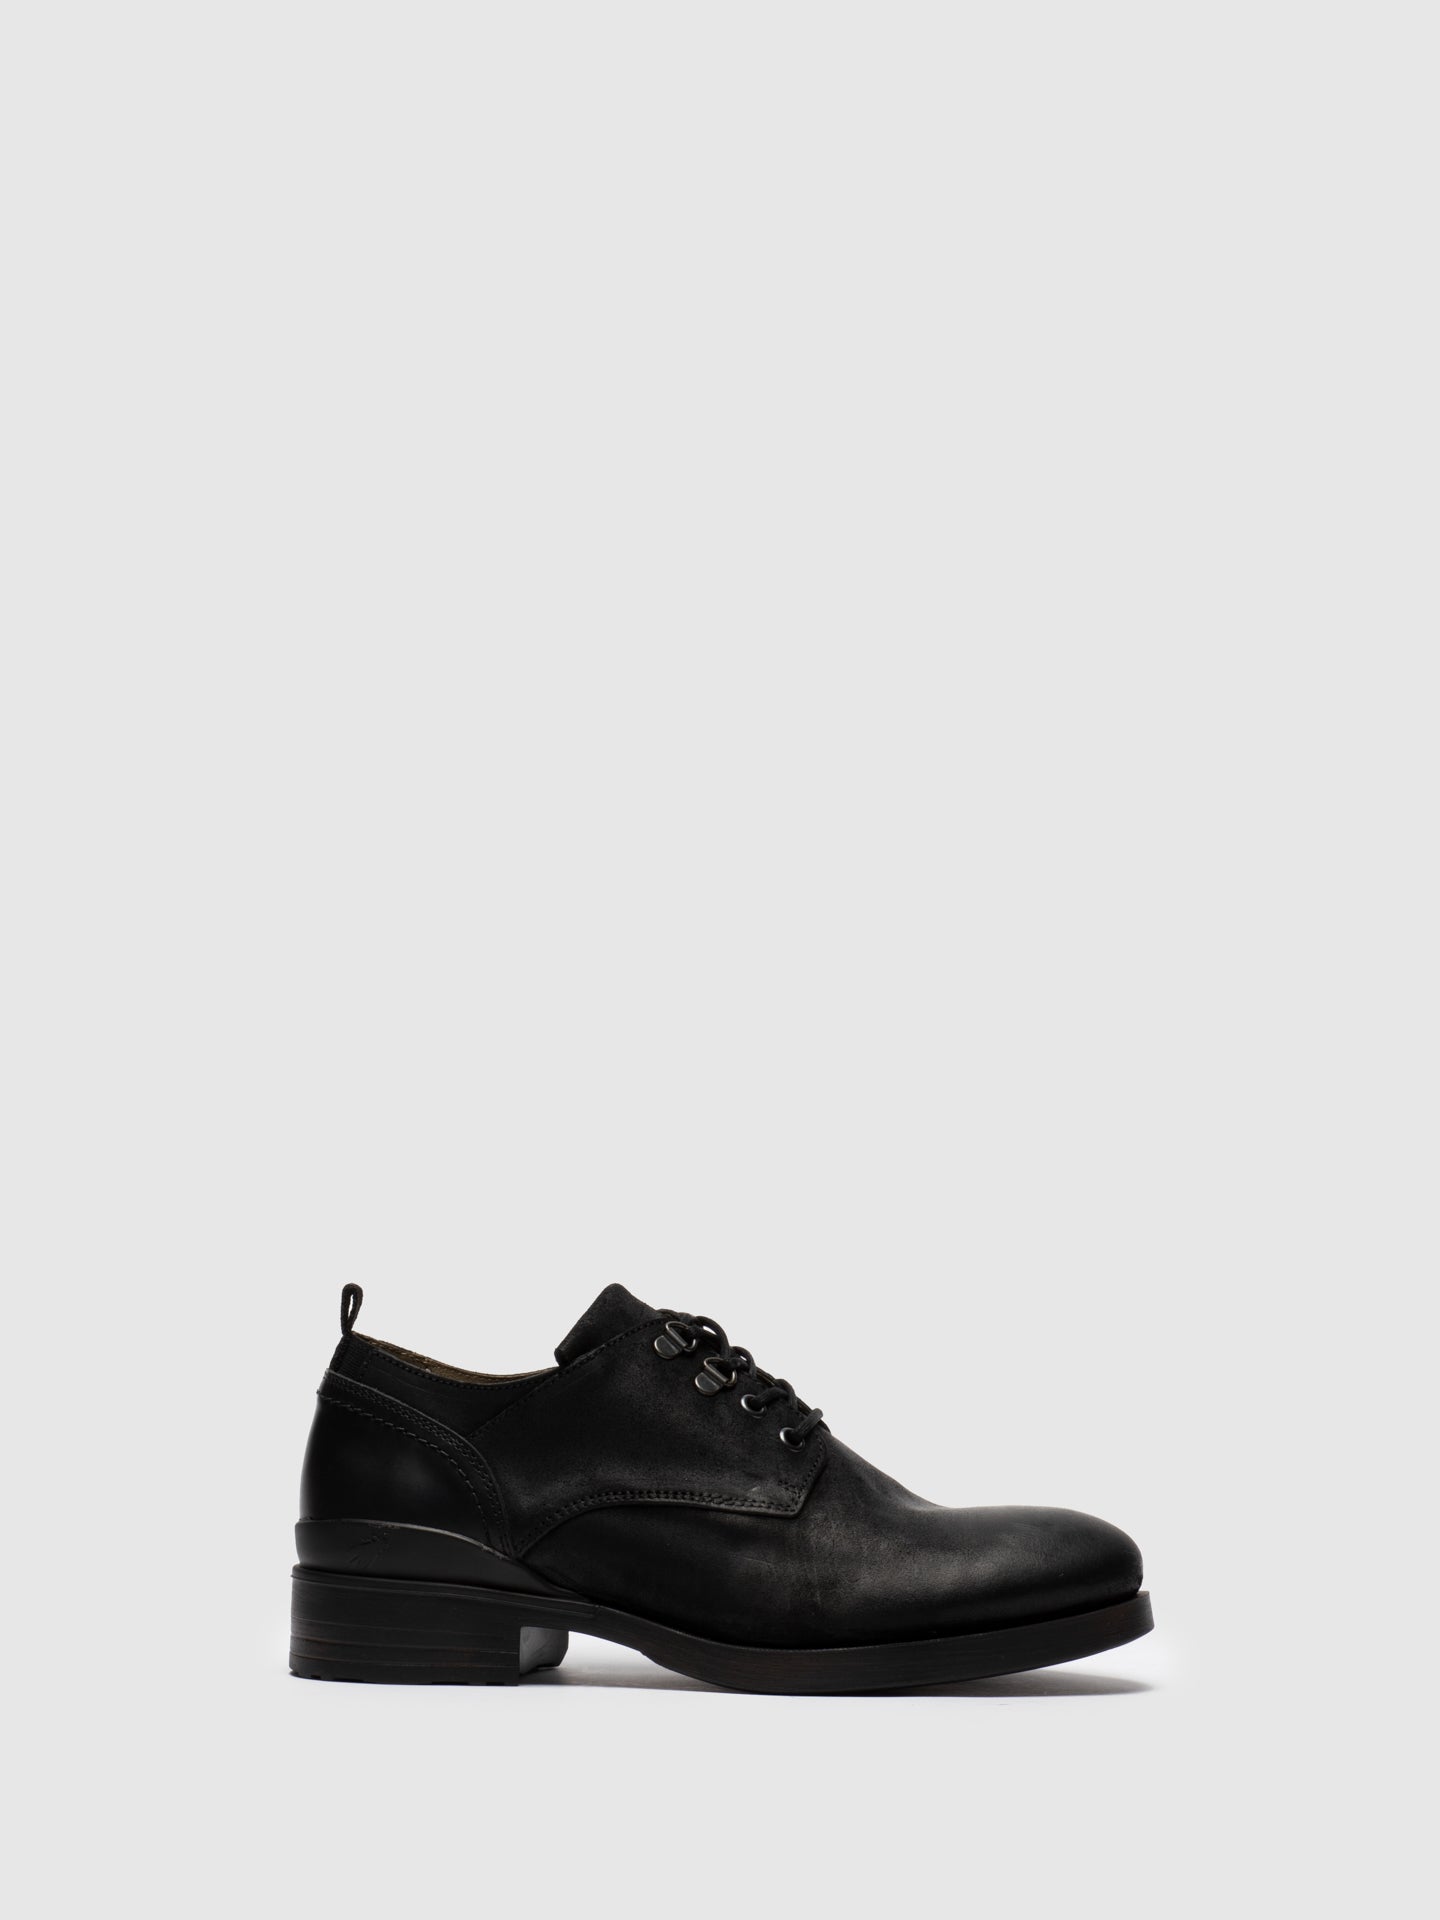 Fly London Black Lace-up Shoes